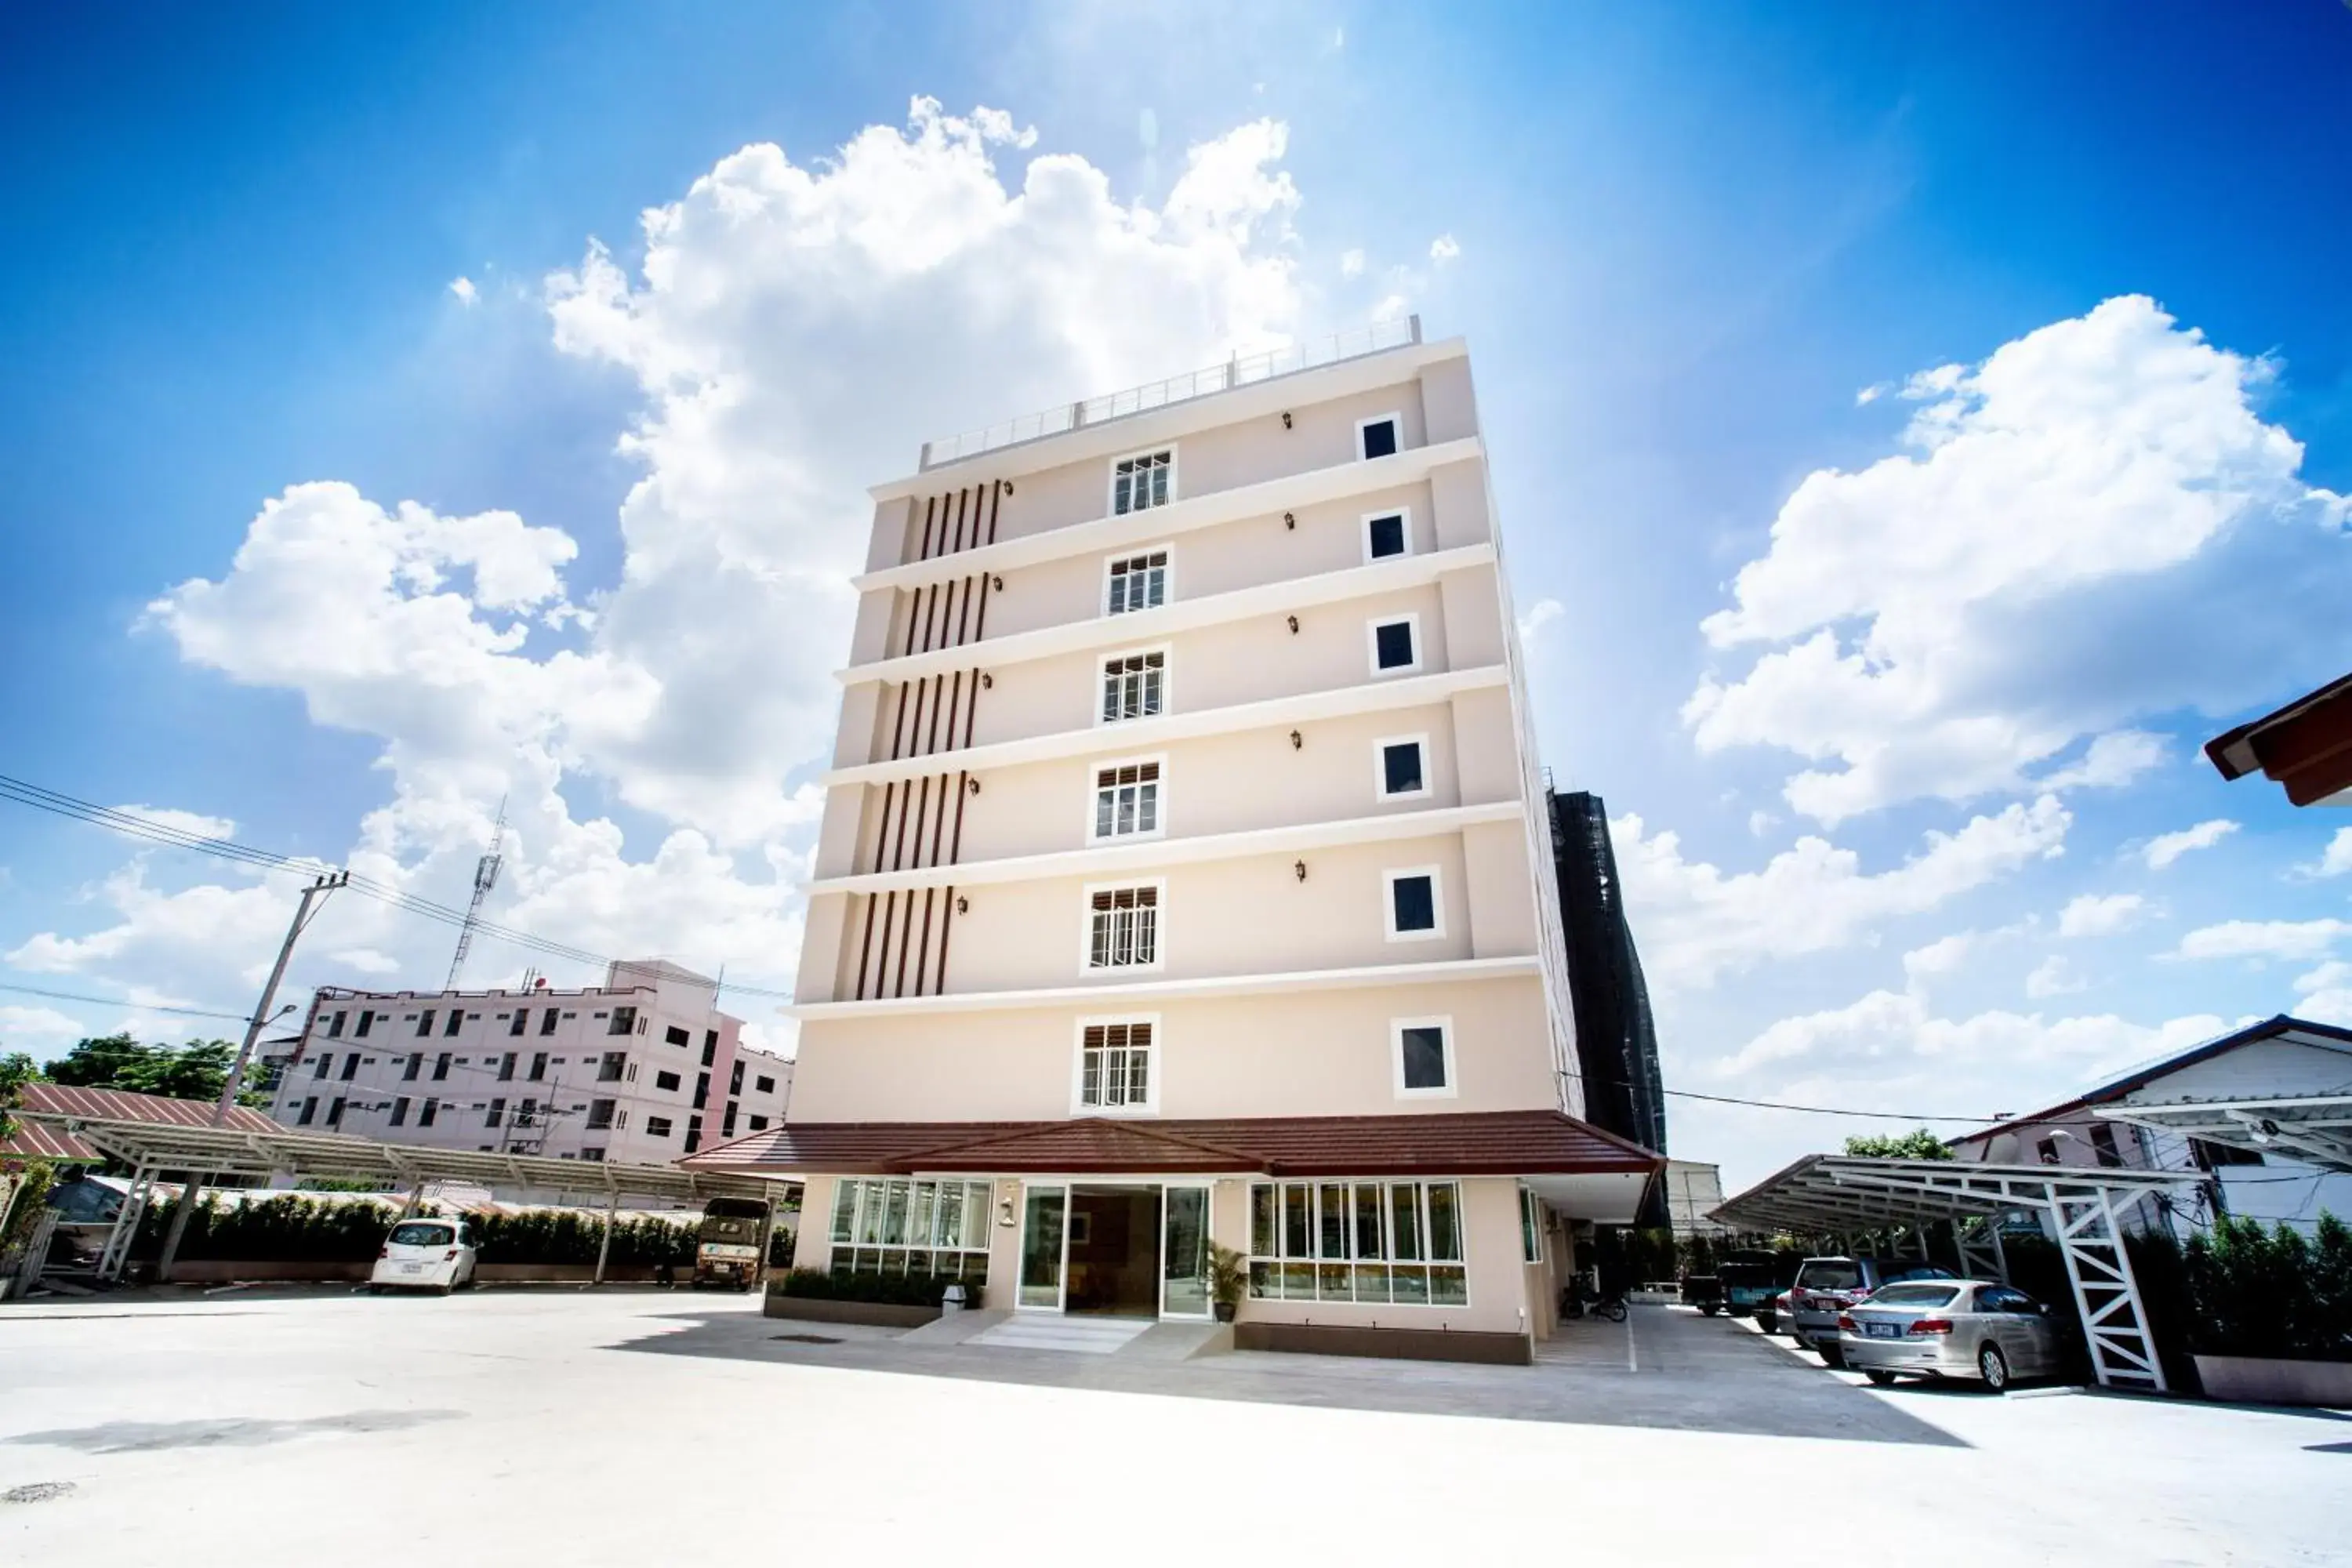 Property building in P.A. Thani Hotel